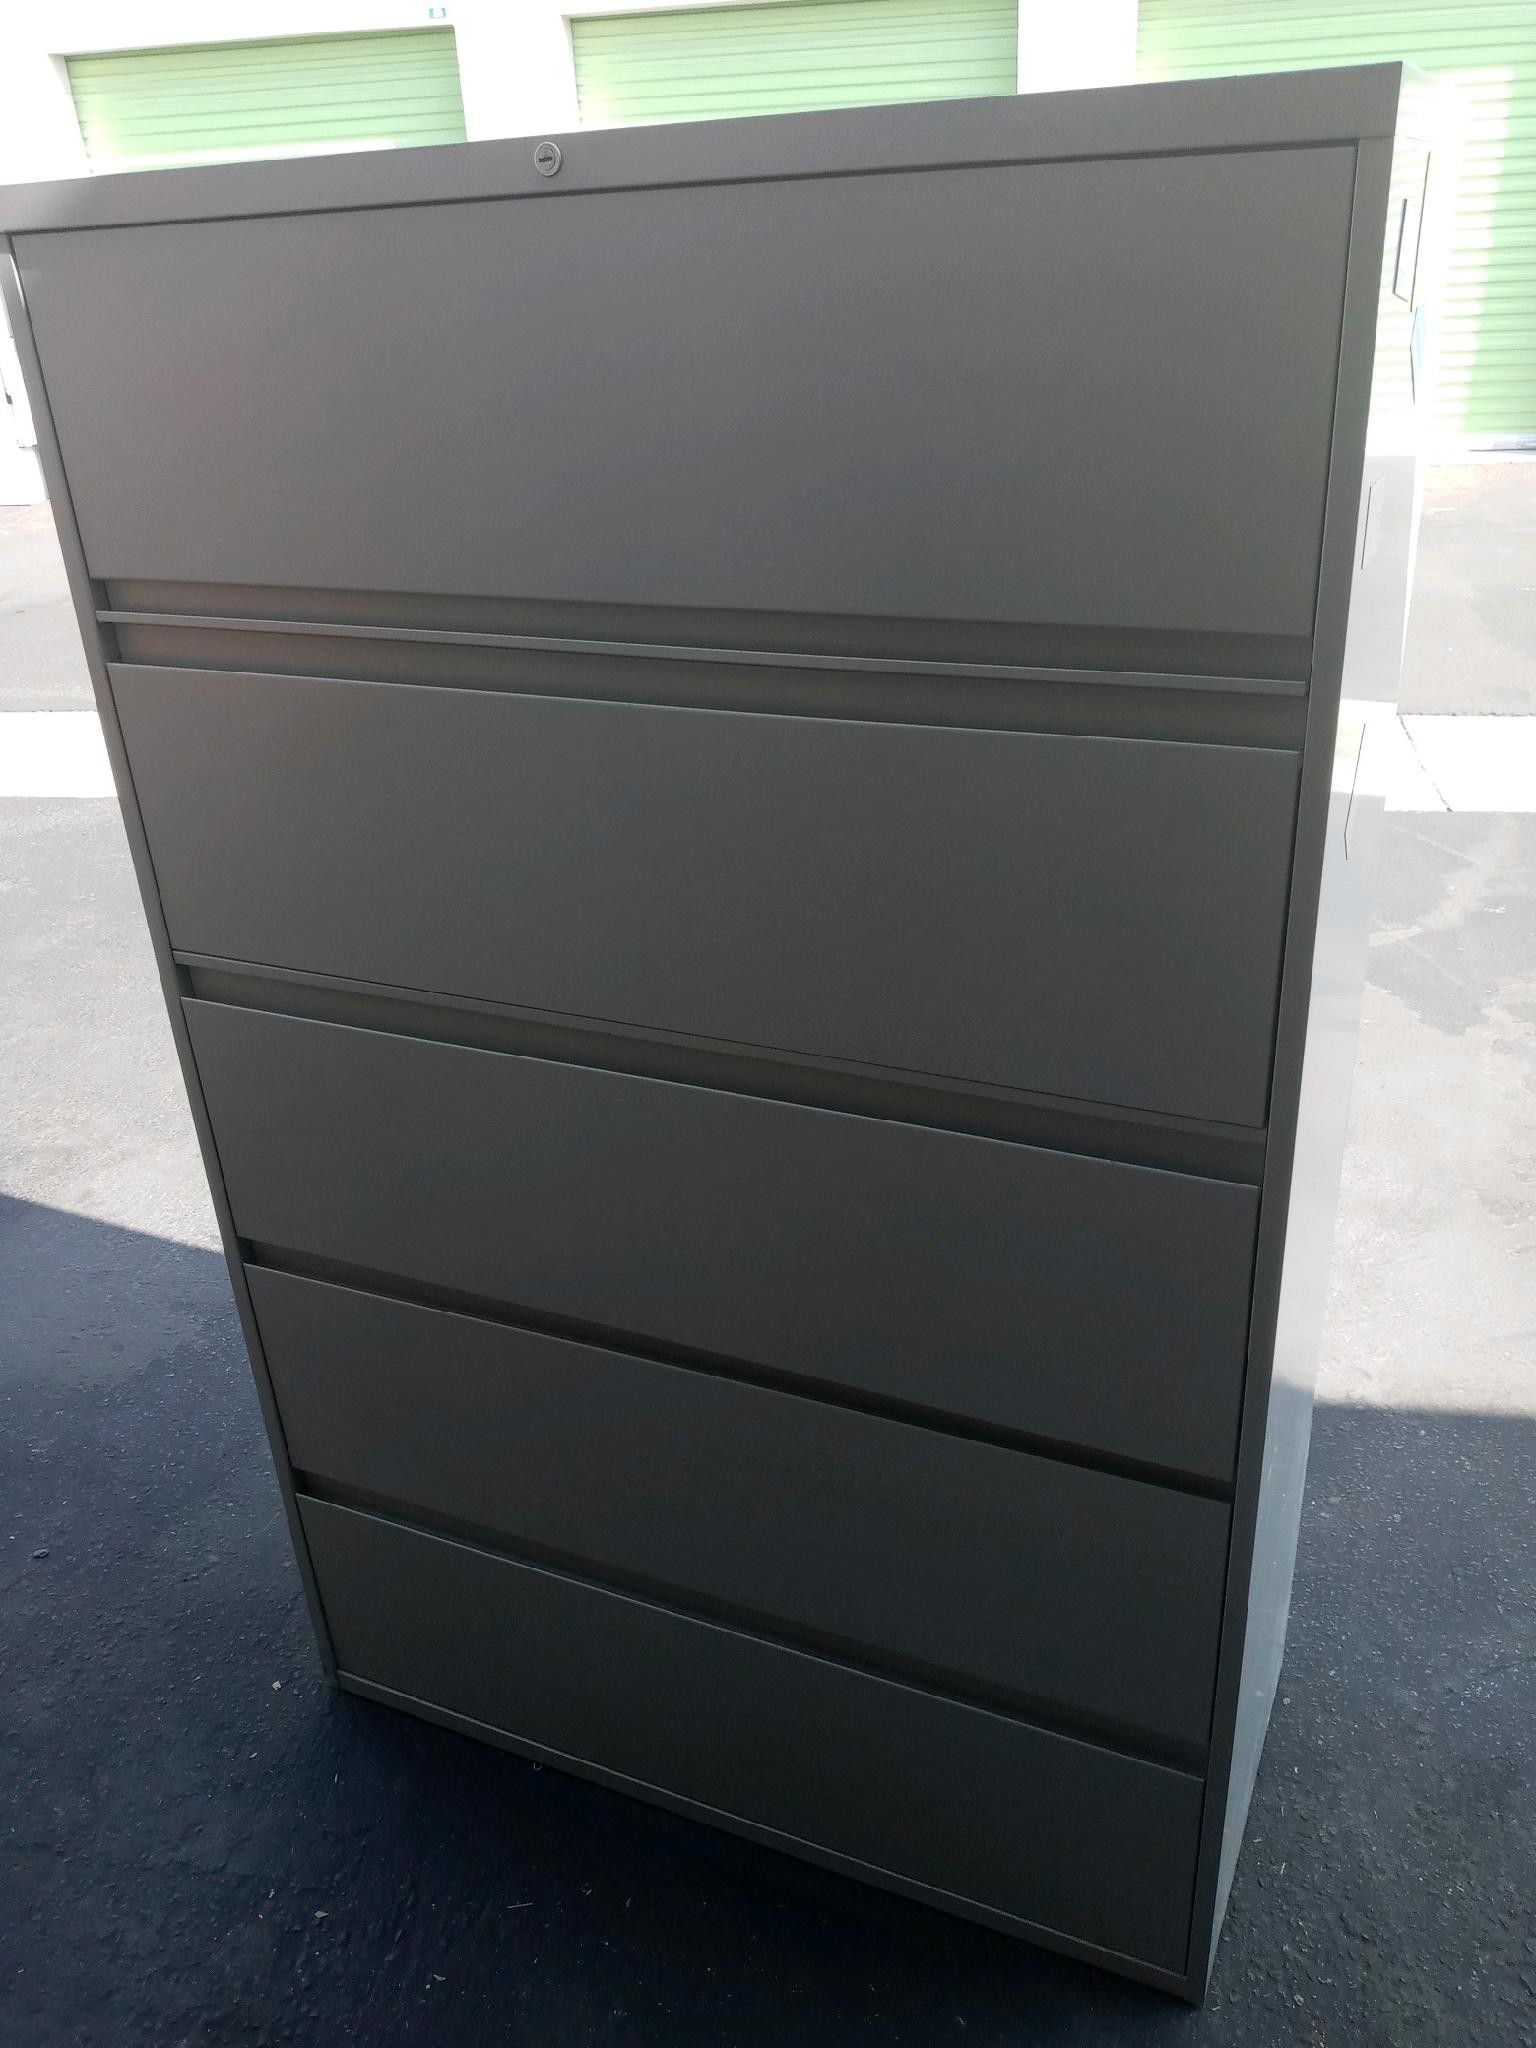 5 drawer file cabinet in excellent condition comes with key for lock